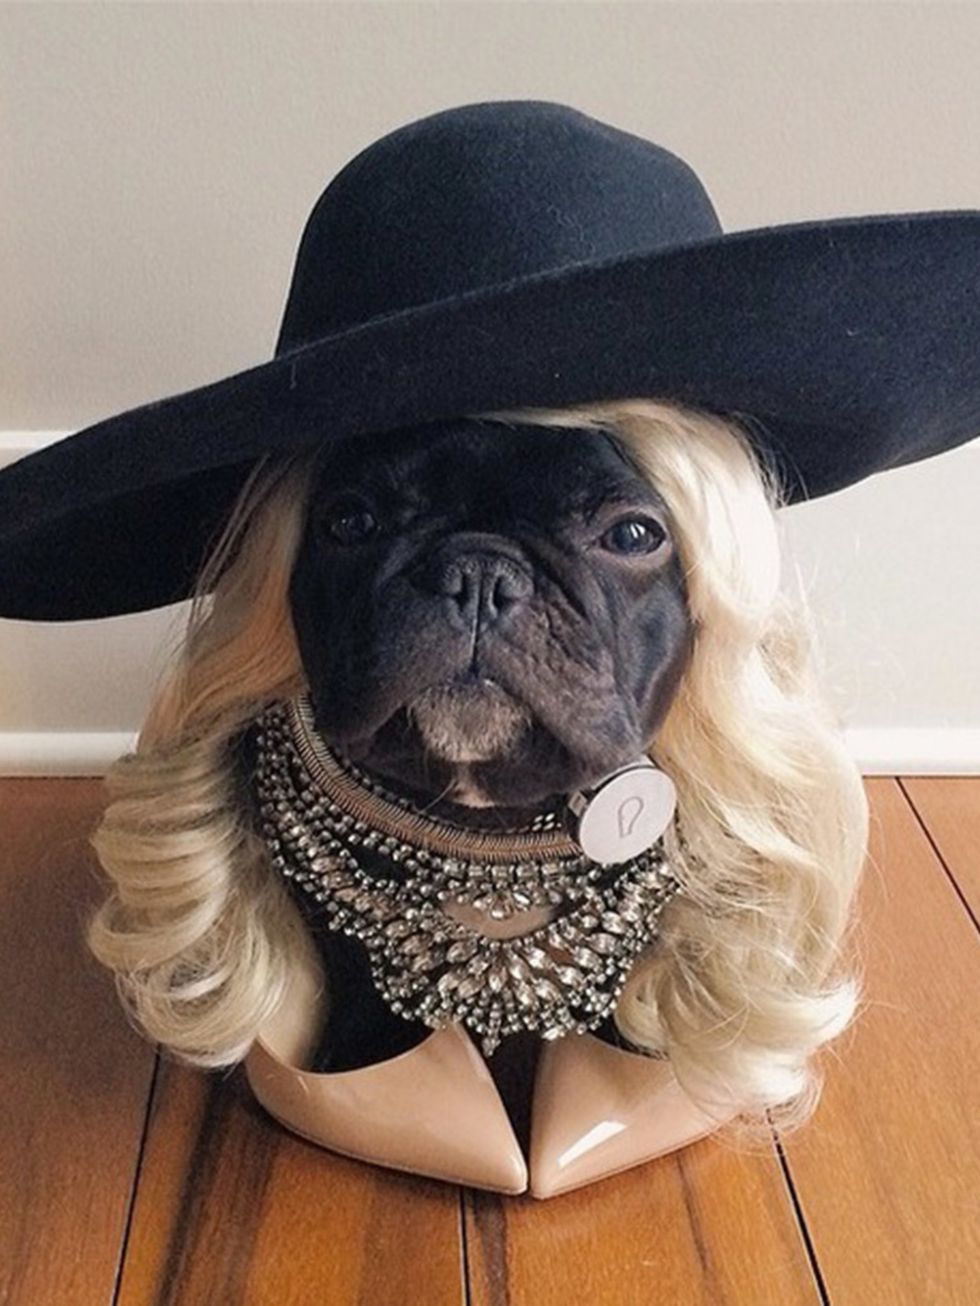 <p><strong>Trotter Pup</strong></p>

<p>It&rsquo;s a French bulldog, wearing wigs and hats. We love it.</p>

<p><a href="http://instagram.com/trotterpup" target="_blank">instagram.com/<br />
trotterpup</a></p>